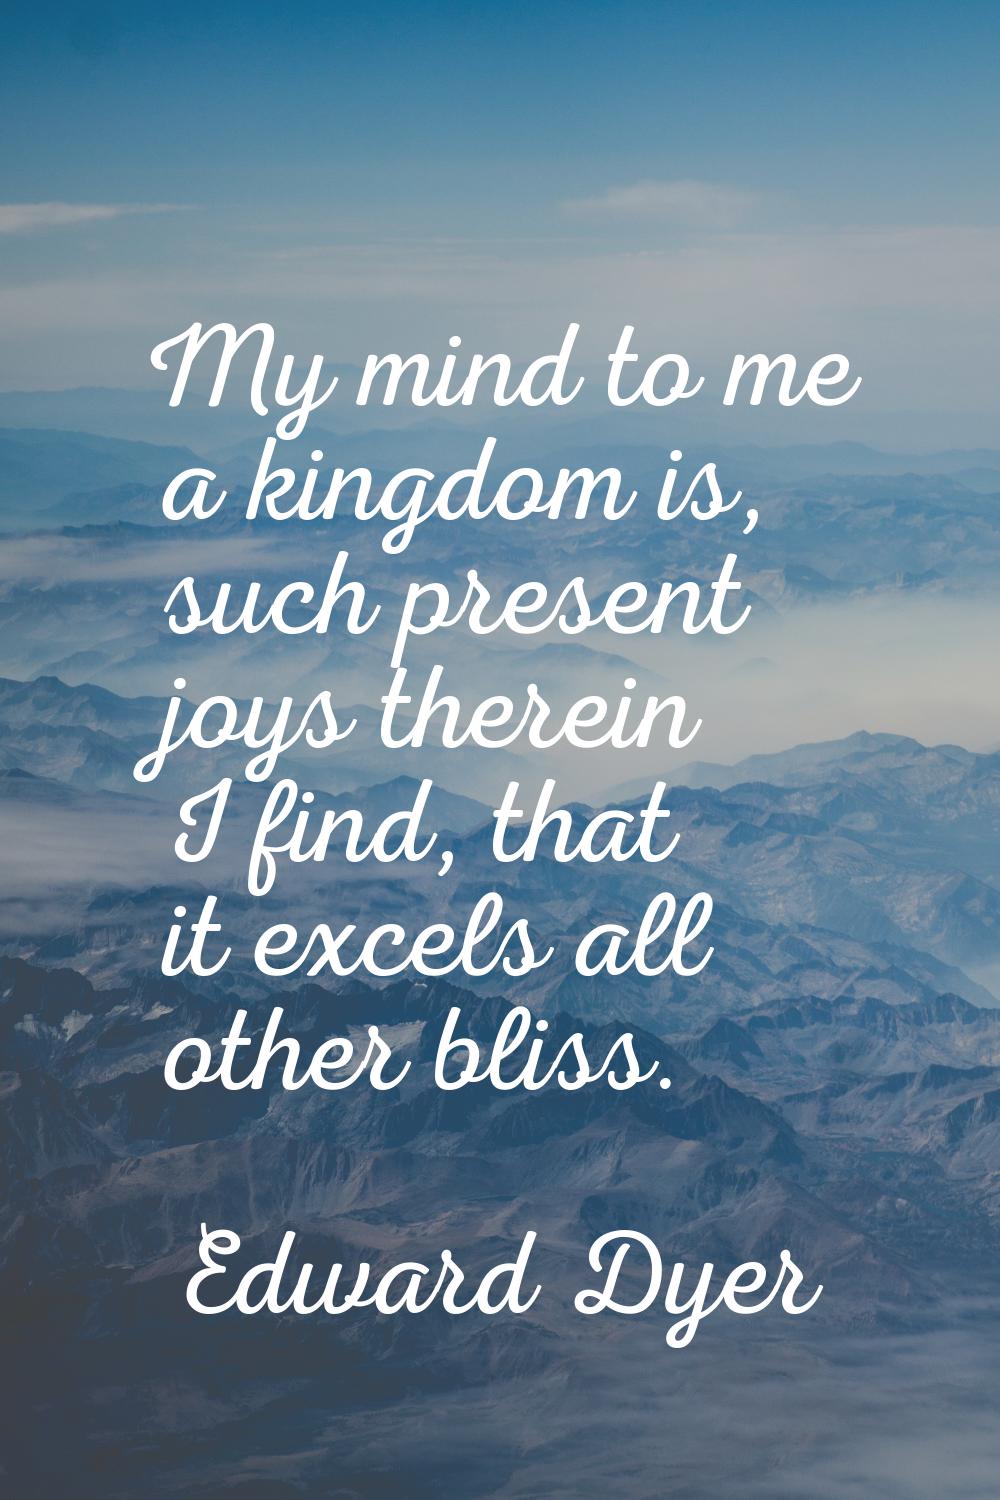 My mind to me a kingdom is, such present joys therein I find, that it excels all other bliss.